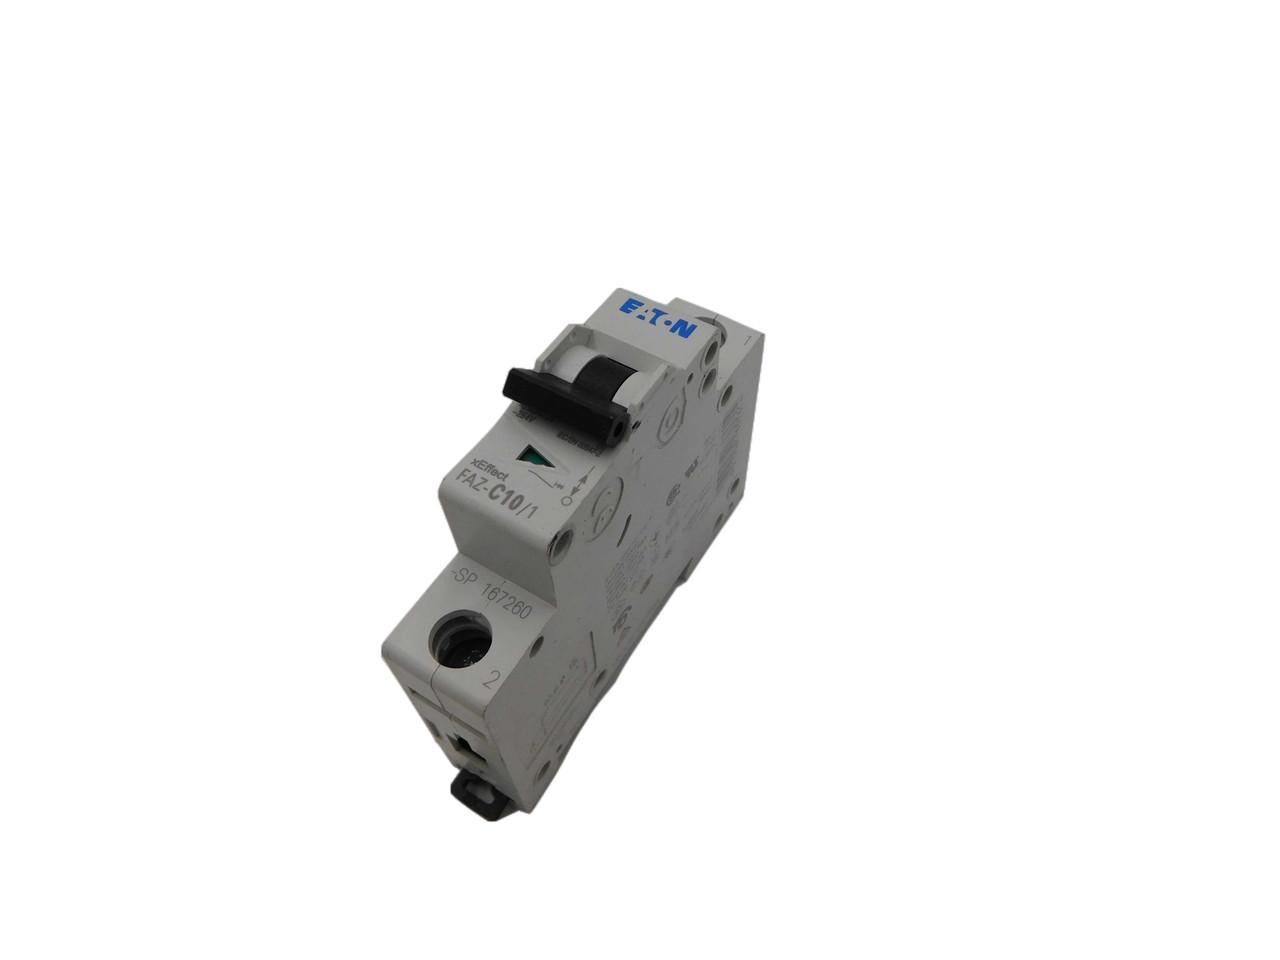 Eaton FAZ-C10/1 277/480 VAC 50/60 Hz, 10 A, 1-Pole, 10 kA, 5 to 10 x Rated Current, Line/Load Terminal, DIN Rail Mount, Standard Packaging, C-Curve, Current Limiting, Thermal Magnetic, Supplementary Protector